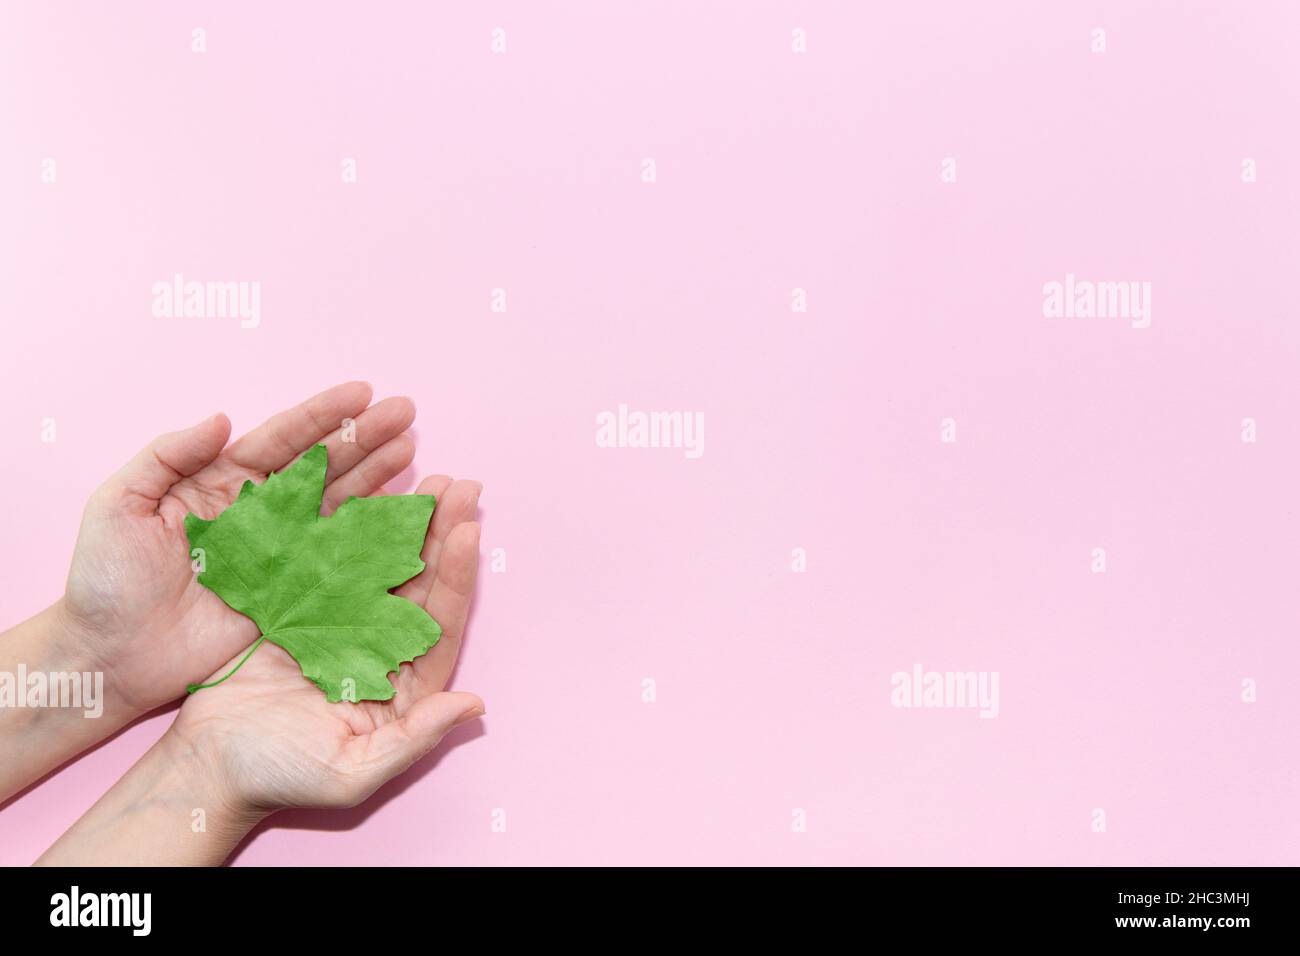 Green Energy, Renewable and Sustainable Resources. Environmental and Ecology Care Concept. Hands holding a green leaf on pastel pink background. Stock Photo